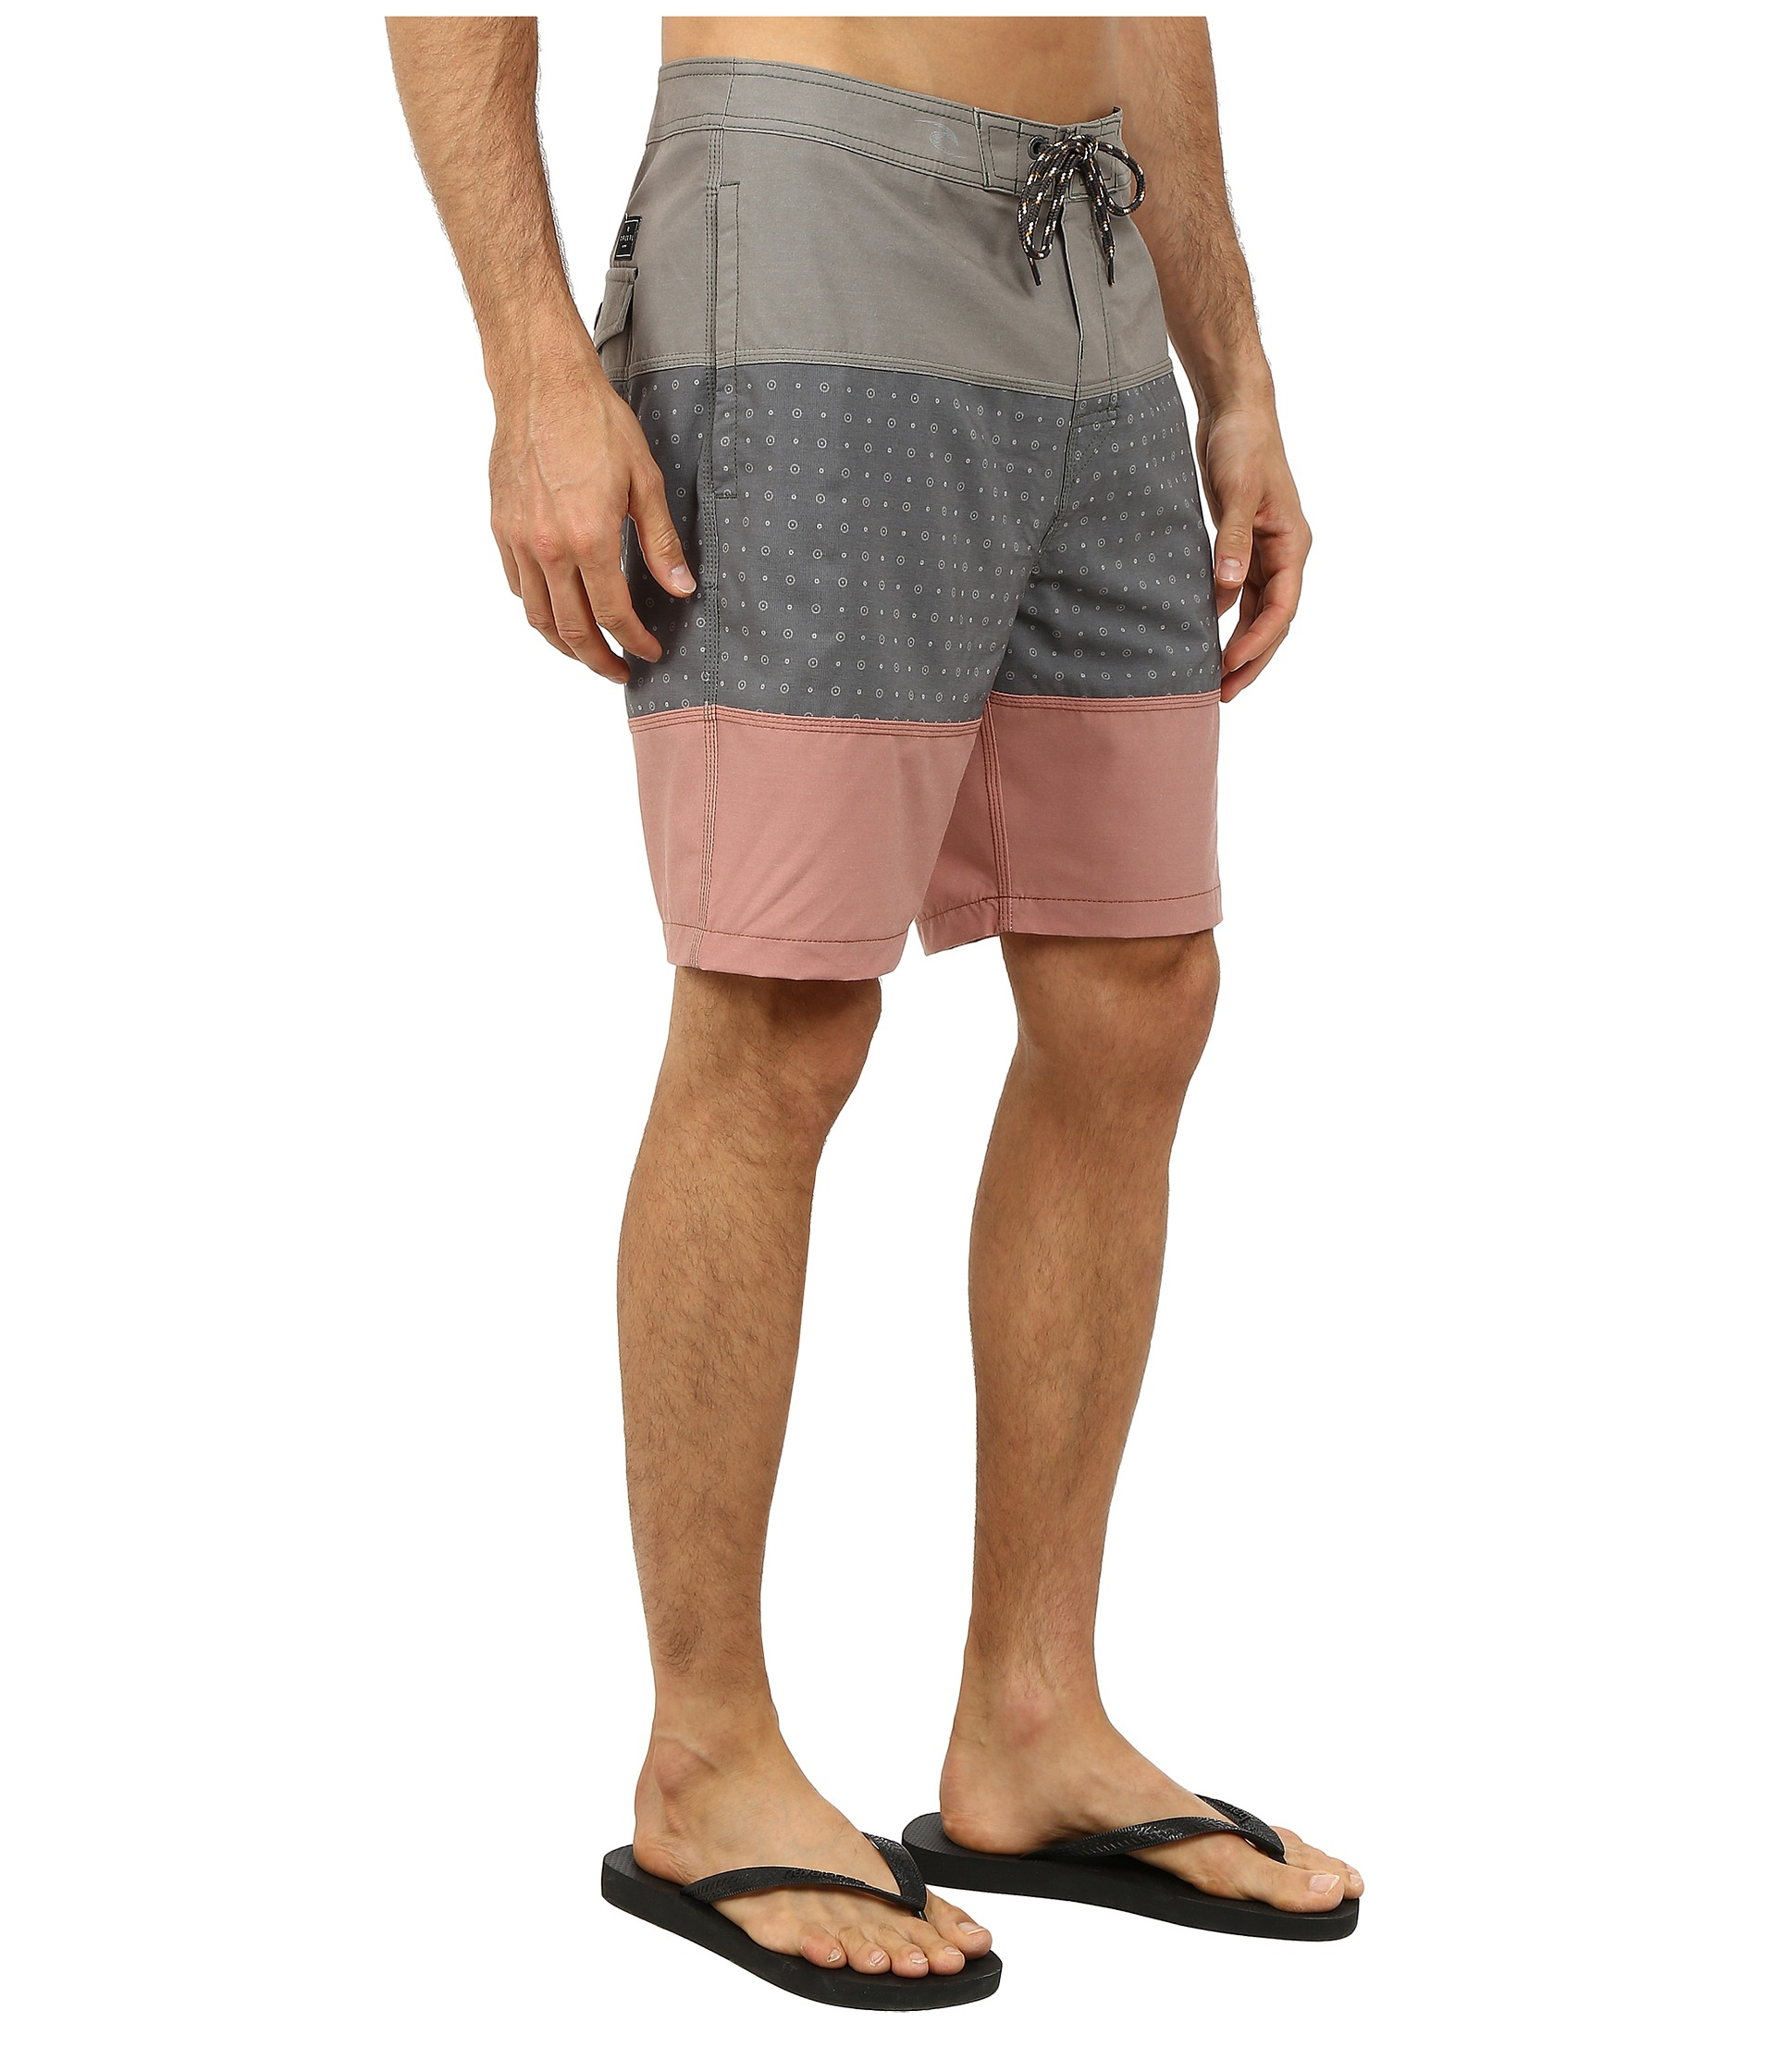 Lyst - Rip Curl Caught Up Boardwalk Shorts in Gray for Men